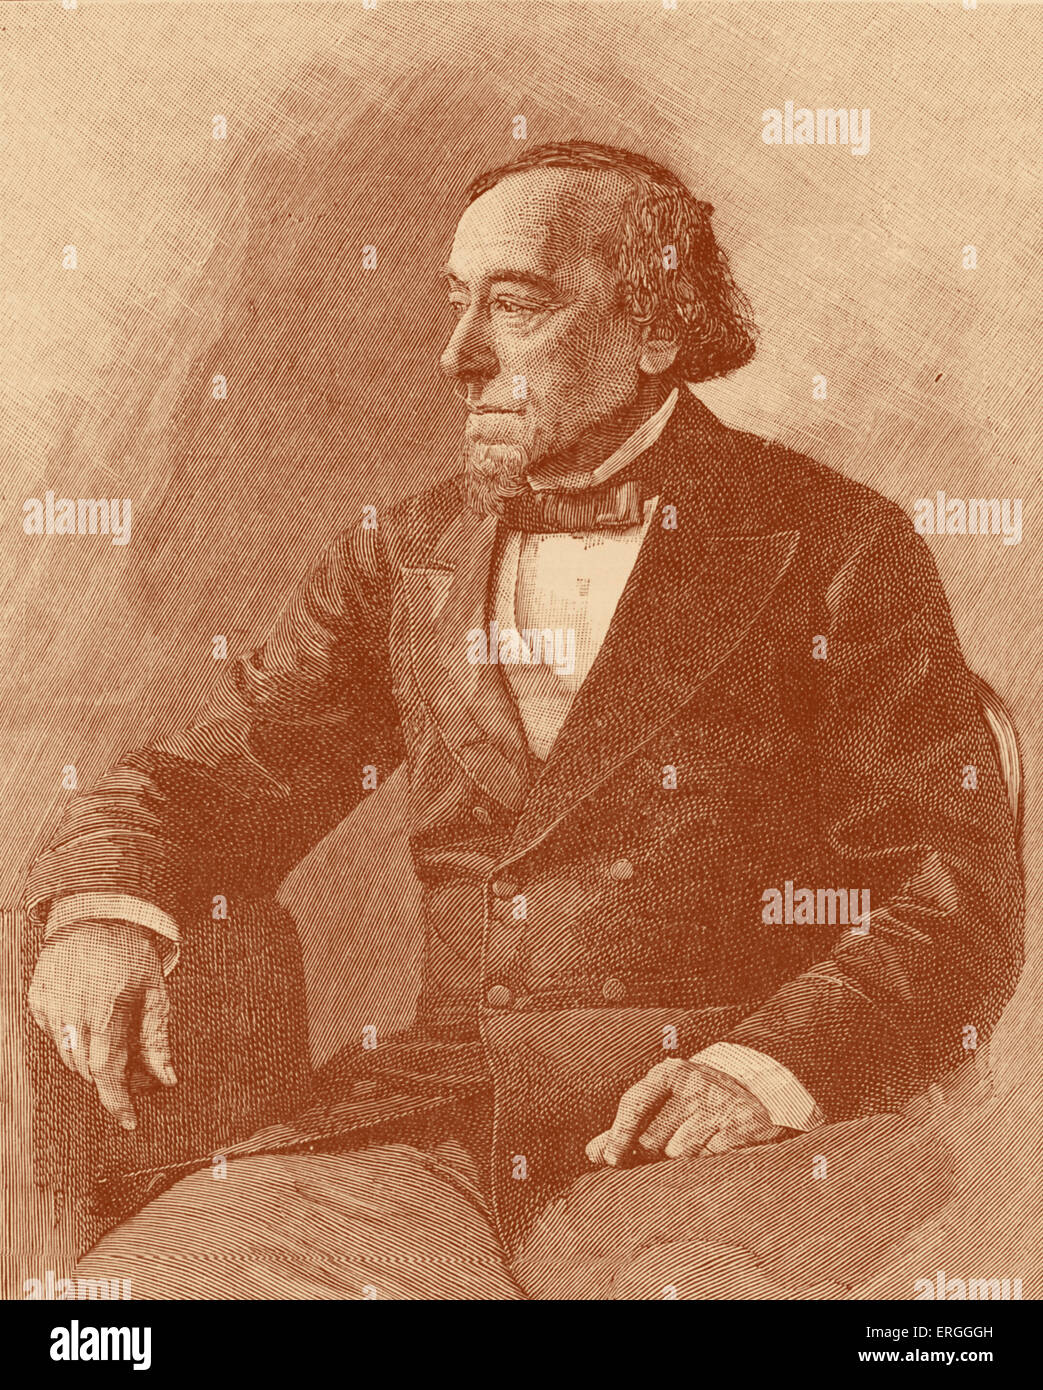 Benjamin Disraeli, 1st Earl of Beaconsfield  - portrait after photograph. British Prime Minister, parliamentarian, Conservative Stock Photo